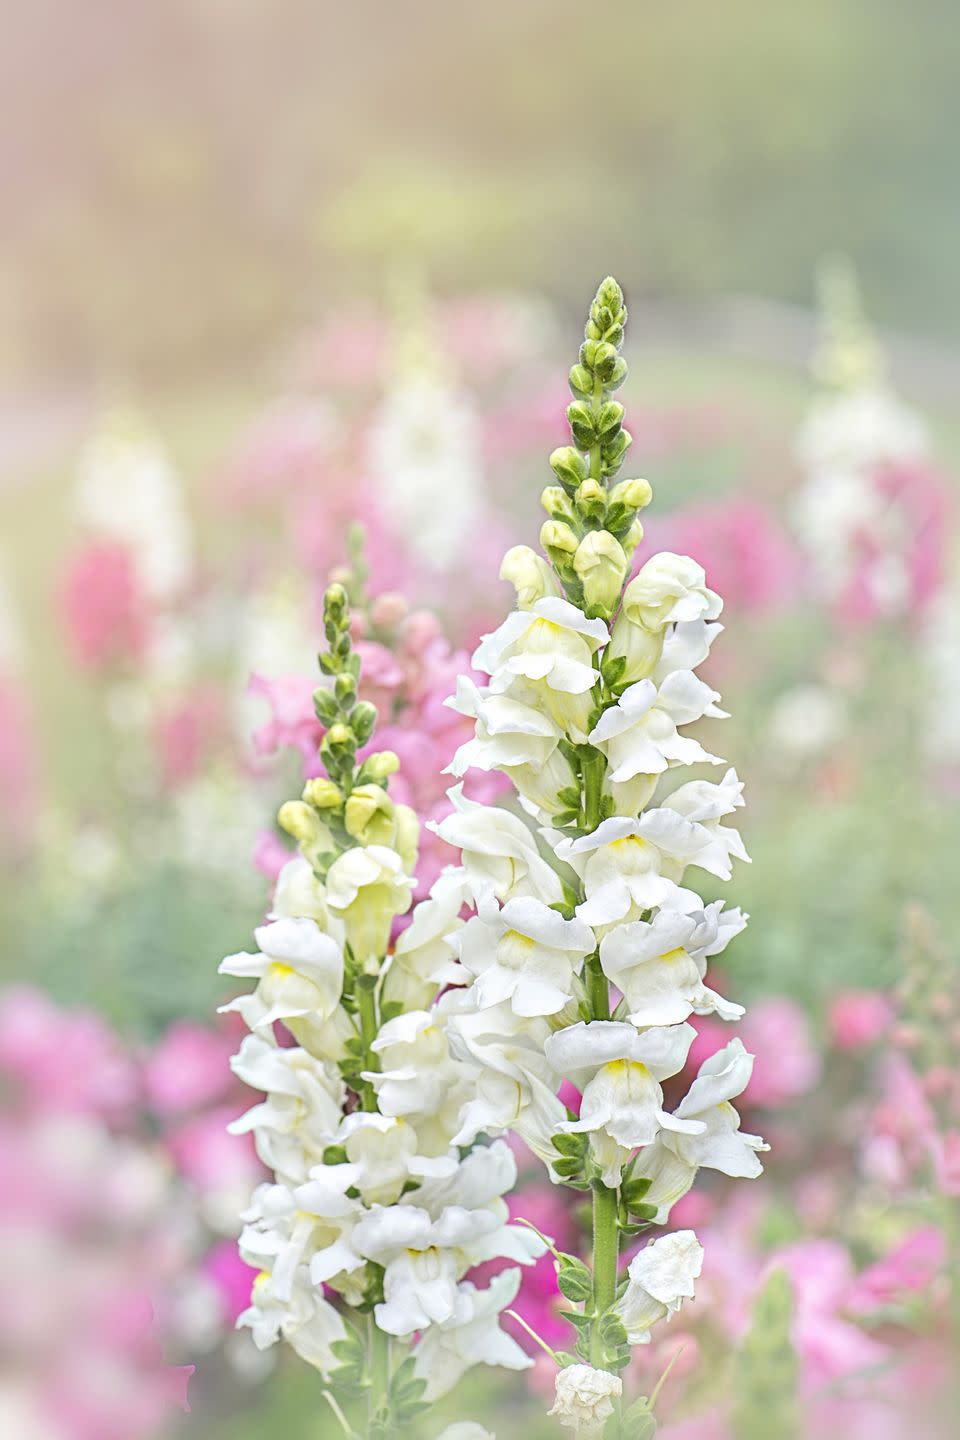 flower meanings, snapdragons